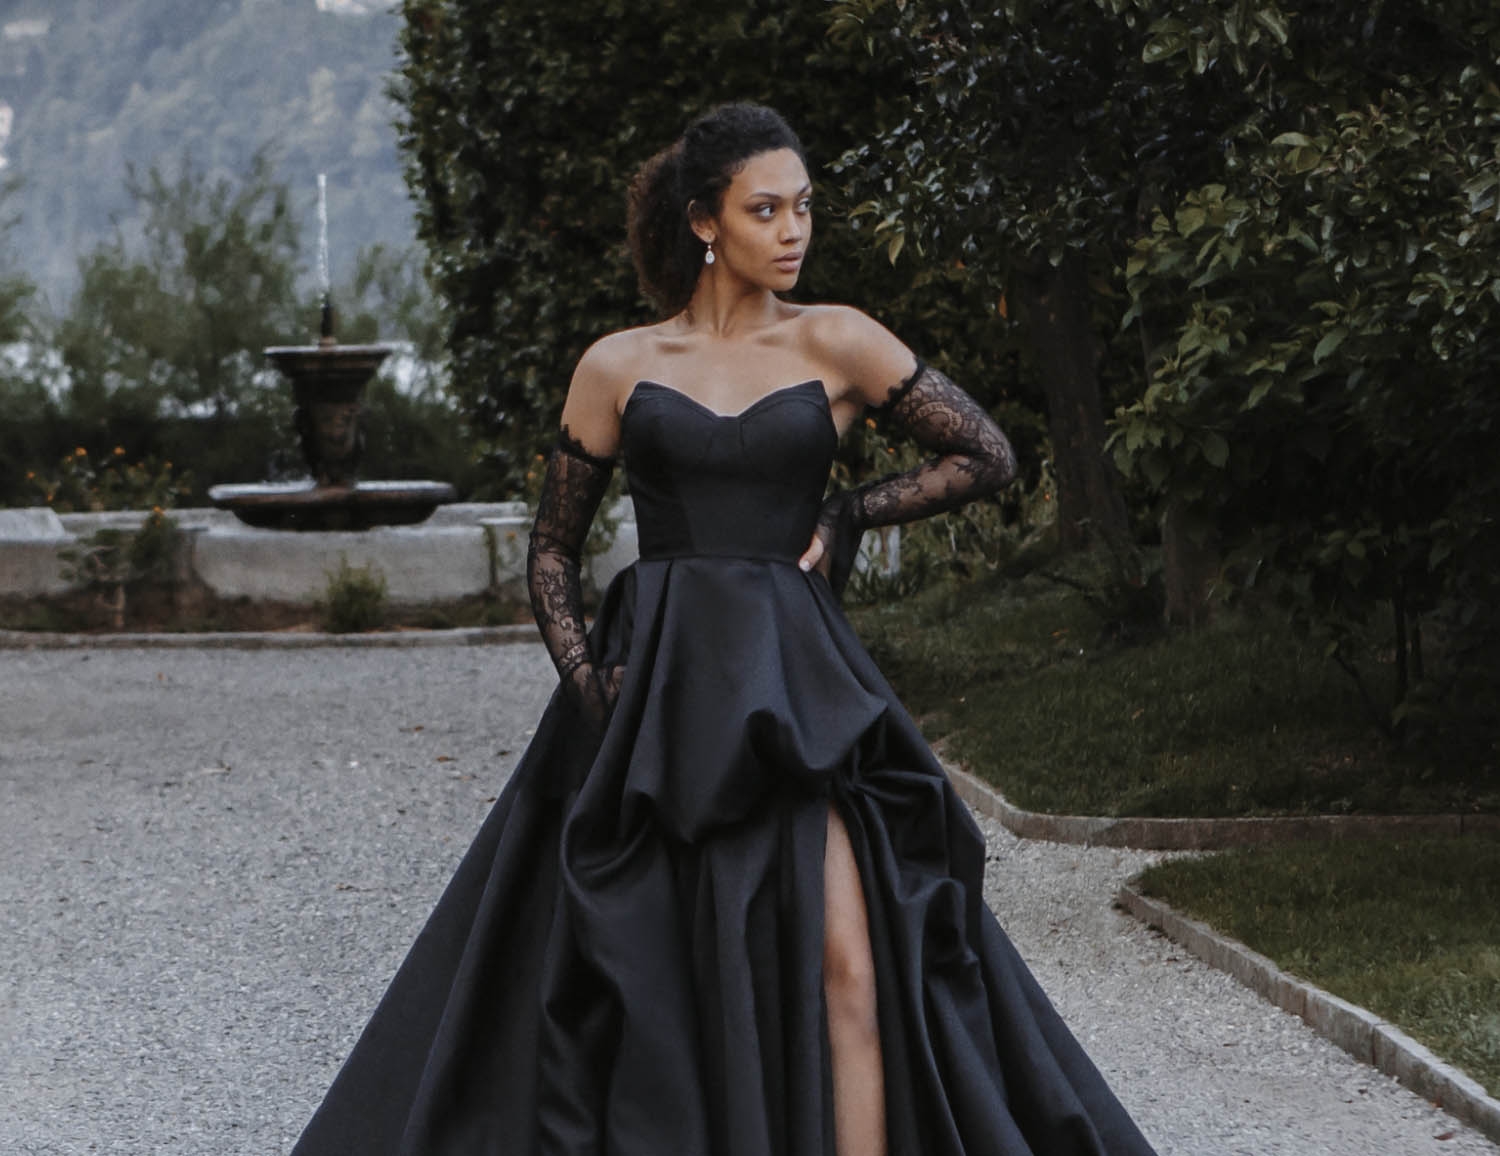 Model wearing a black gown. Mobile image